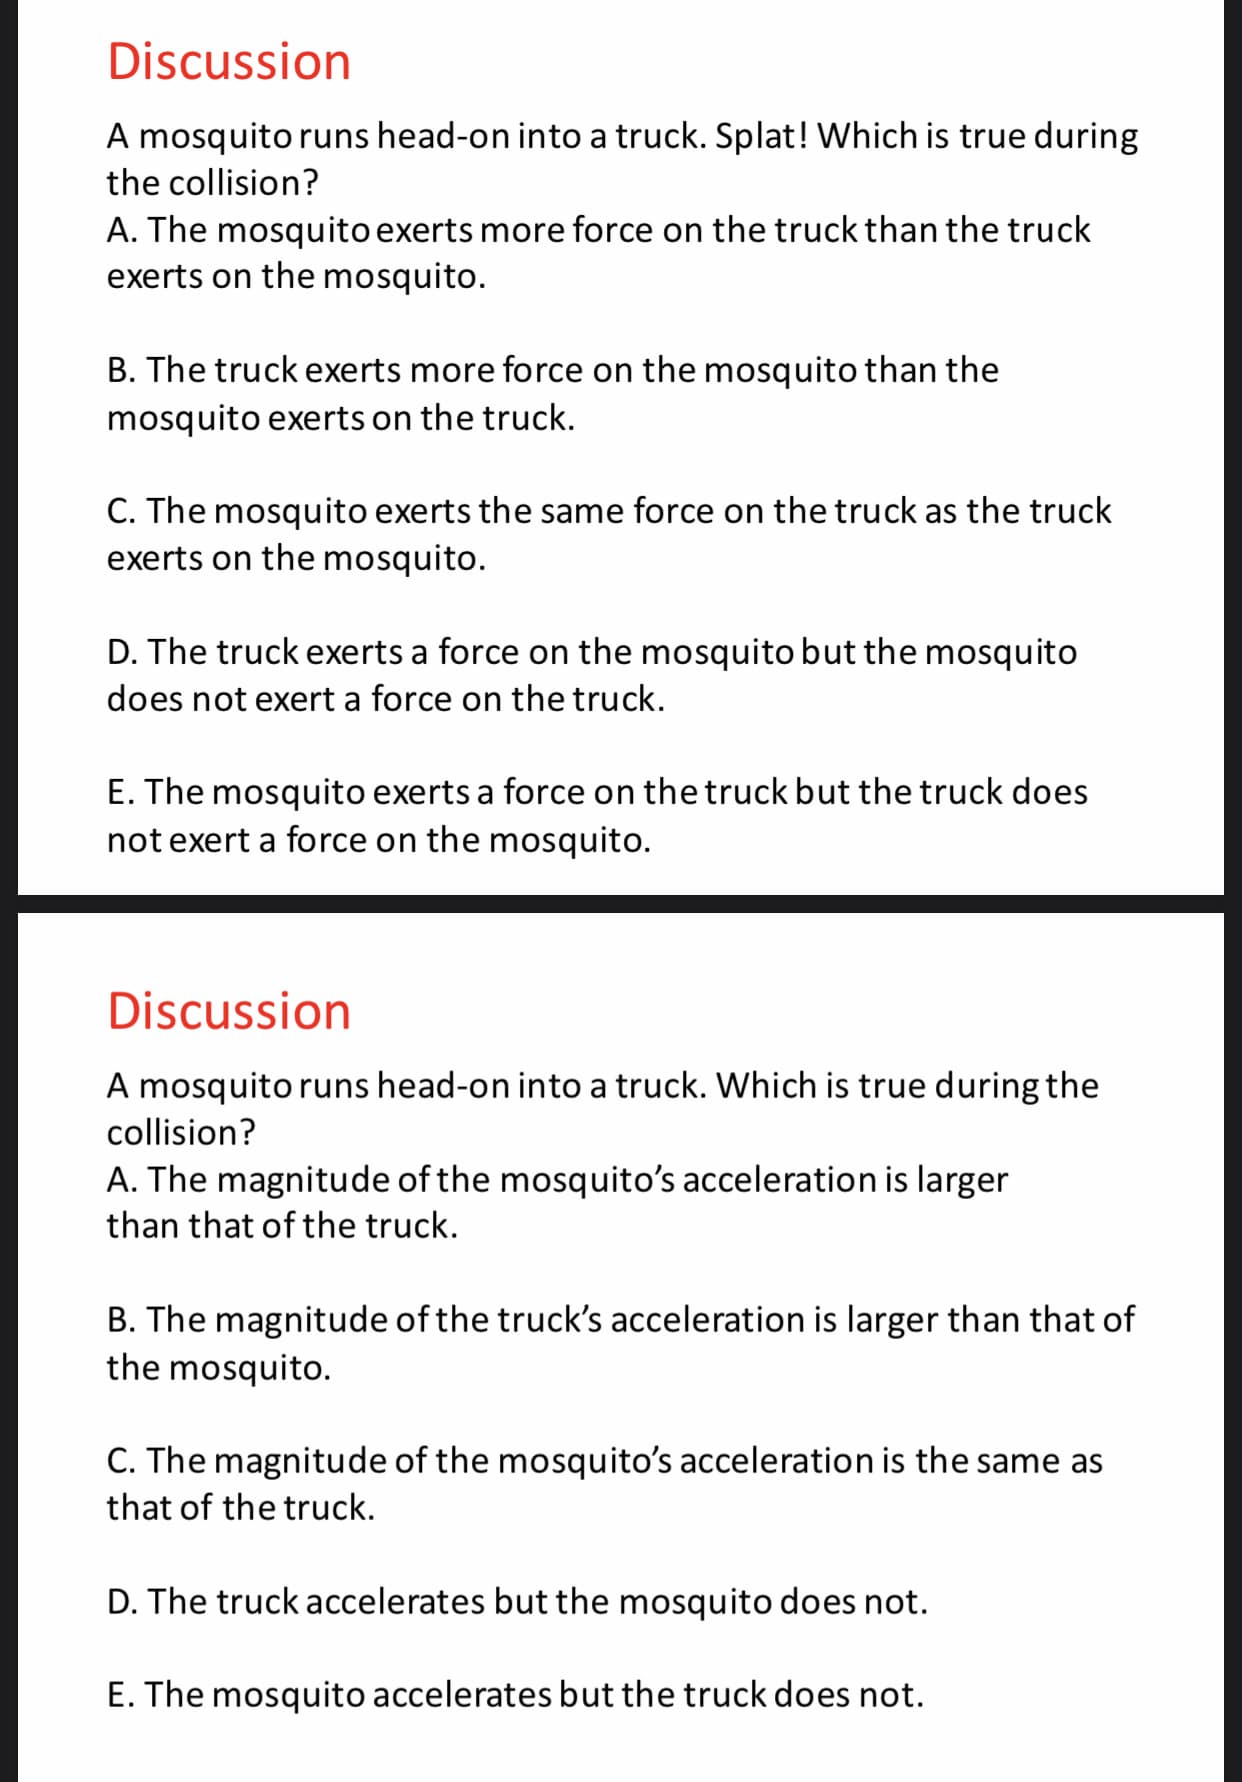 Discussion
A mosquito runs head-on into a truck. Splat! Which is true during
the collision?
A. The mosquito exerts more force on the truck than the truck
exerts on the mosquito.
B. The truck exerts more force on the mosquito than the
mosquito exerts on the truck.
C. The mosquito exerts the same force on the truck as the truck
exerts on the mosquito.
D. The truck exerts a force on the mosquito but the mosquito
does not exert a force on the truck.
E. The mosquito exerts a force on the truck but the truck does
not exert a force on the mosquito.
Discussion
A mosquito runs head-on into a truck. Which is true during the
collision?
A. The magnitude of the mosquito's acceleration is larger
than that of the truck
B. The magnitude of the truck's acceleration is larger than that of
the mosquito
C. The magnitude of the mosquito's acceleration is the same as
that of the truck
D. The truck accelerates but the mosquito does not.
E. The mosquito accelerates but the truck does not.
